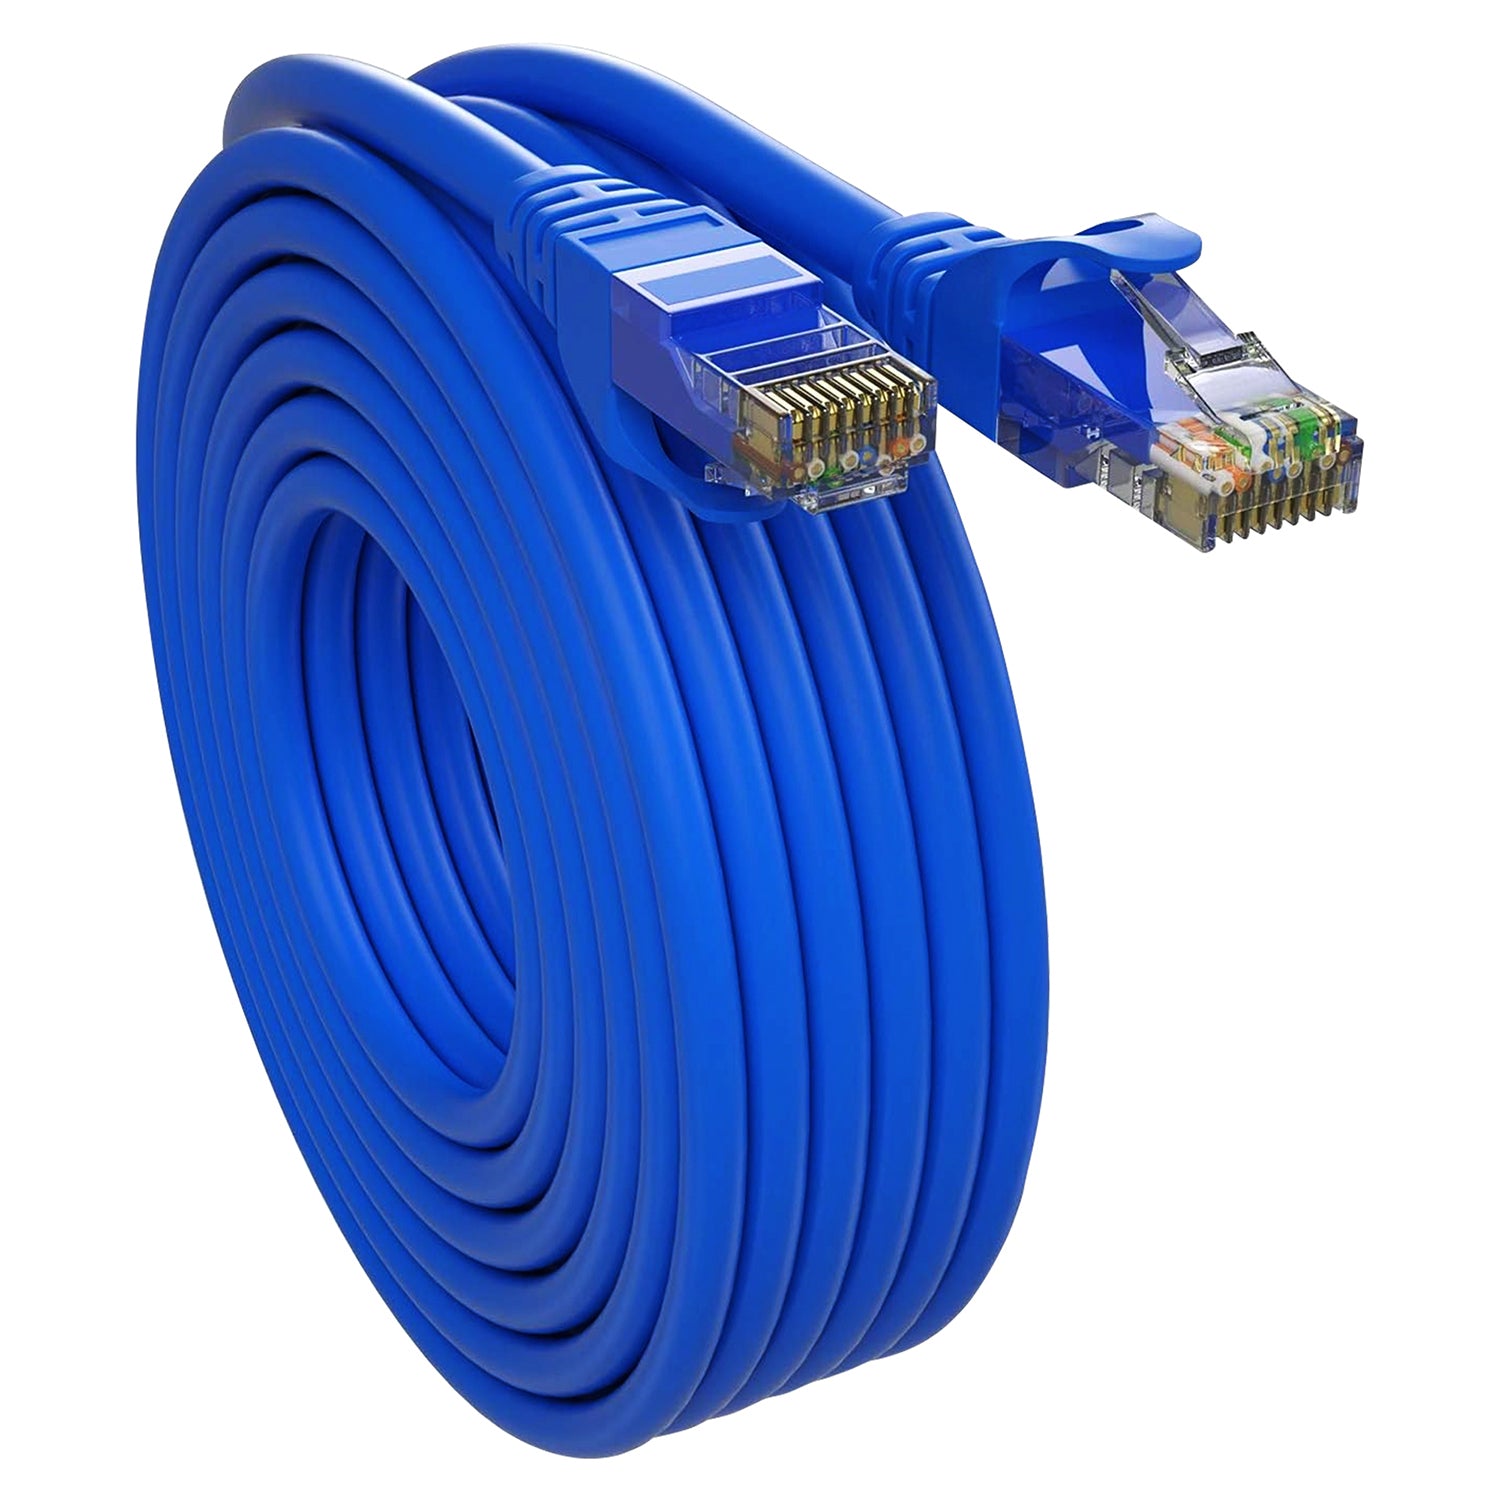 5 Core Cat 6 Ethernet Cable • 20 ft 10Gbps Network Patch Cord • High Speed RJ45 Internet LAN Cable